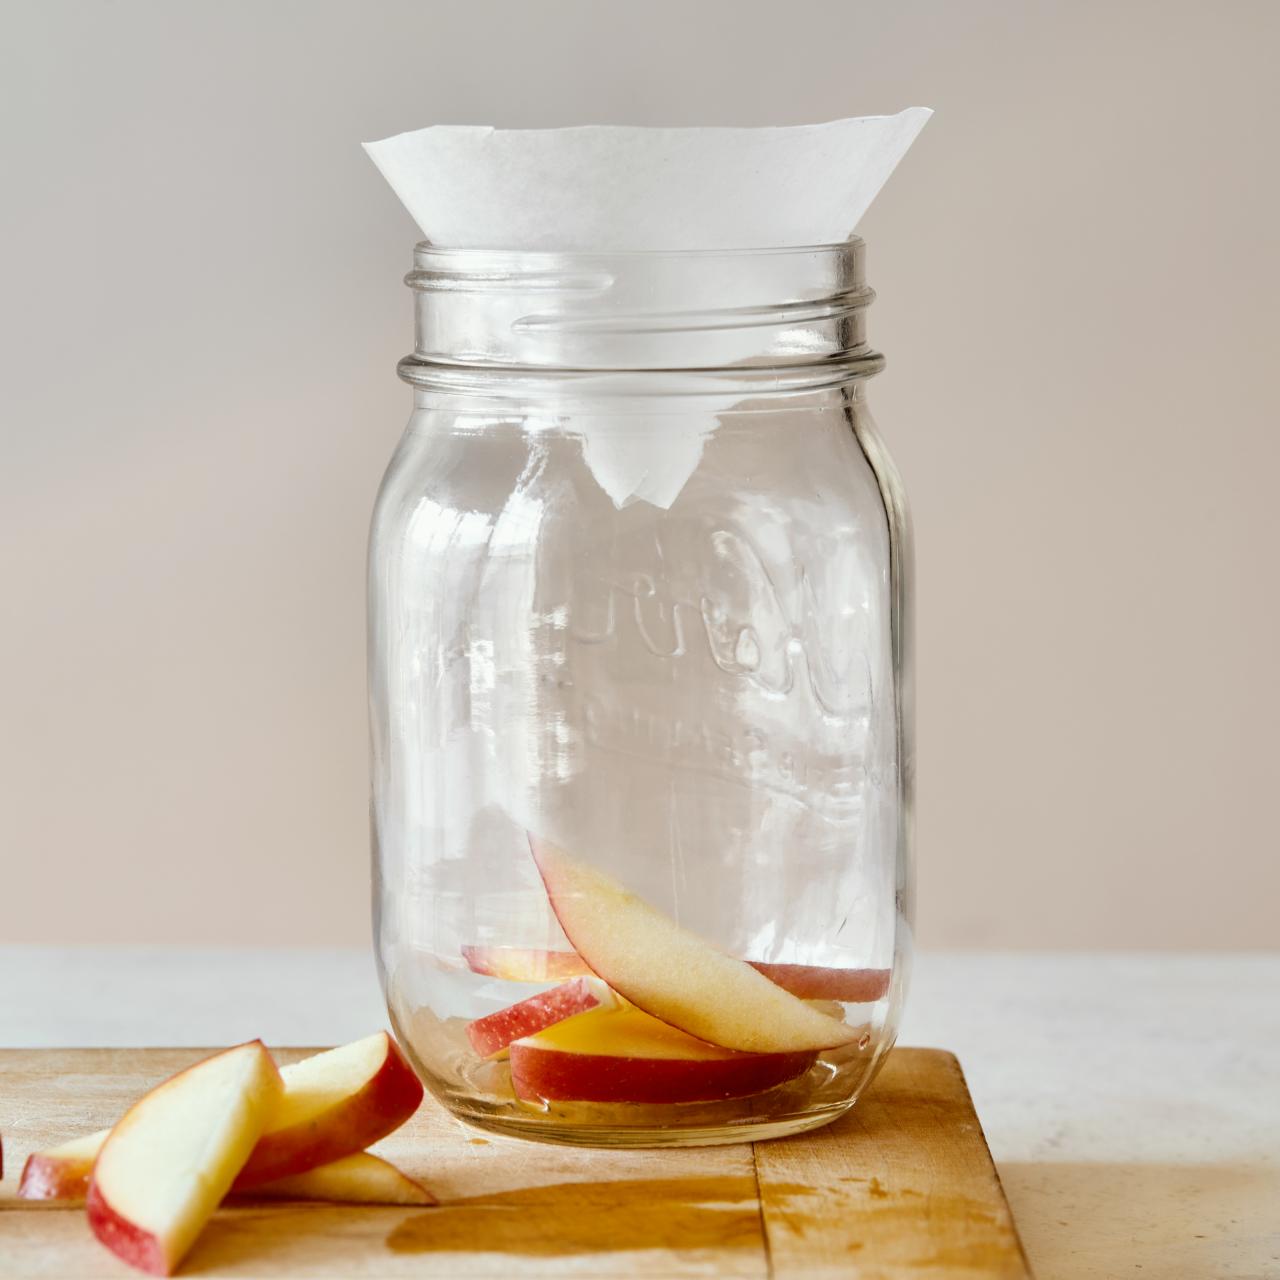 How to Get Rid of Fruit Flies (THE BEST Homemade Fruit Fly Trap)